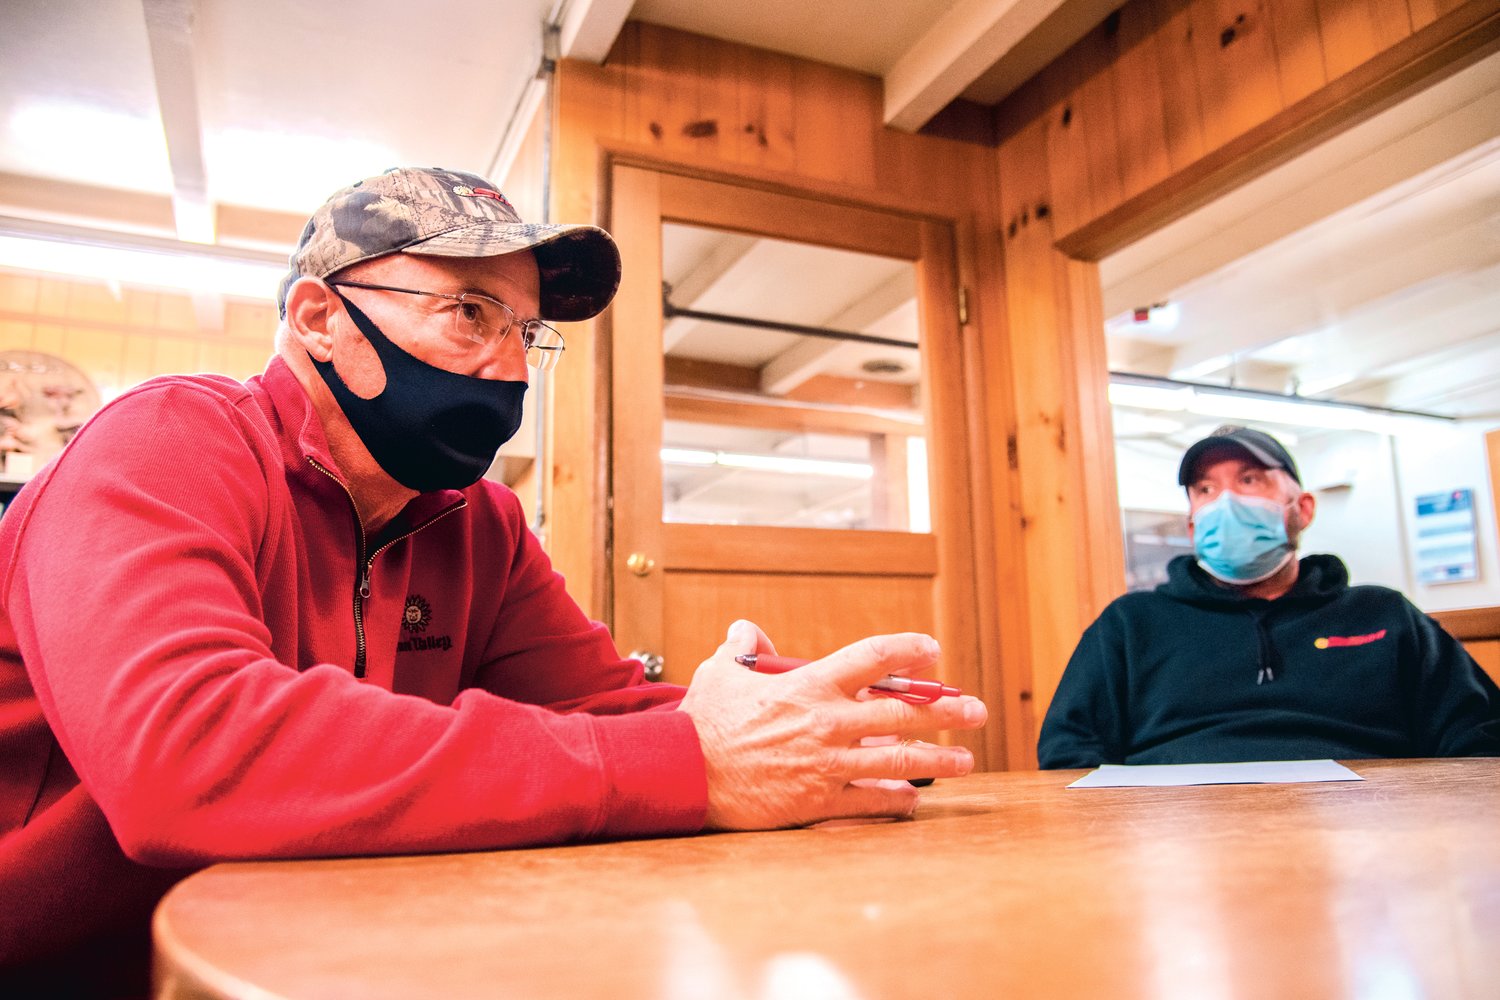 Ron Sturza, left, and Jared Hedgers, co-owners of the Sunbird Shopping Center, talk about the connection they made with customers over the years while in their Chehalis office.